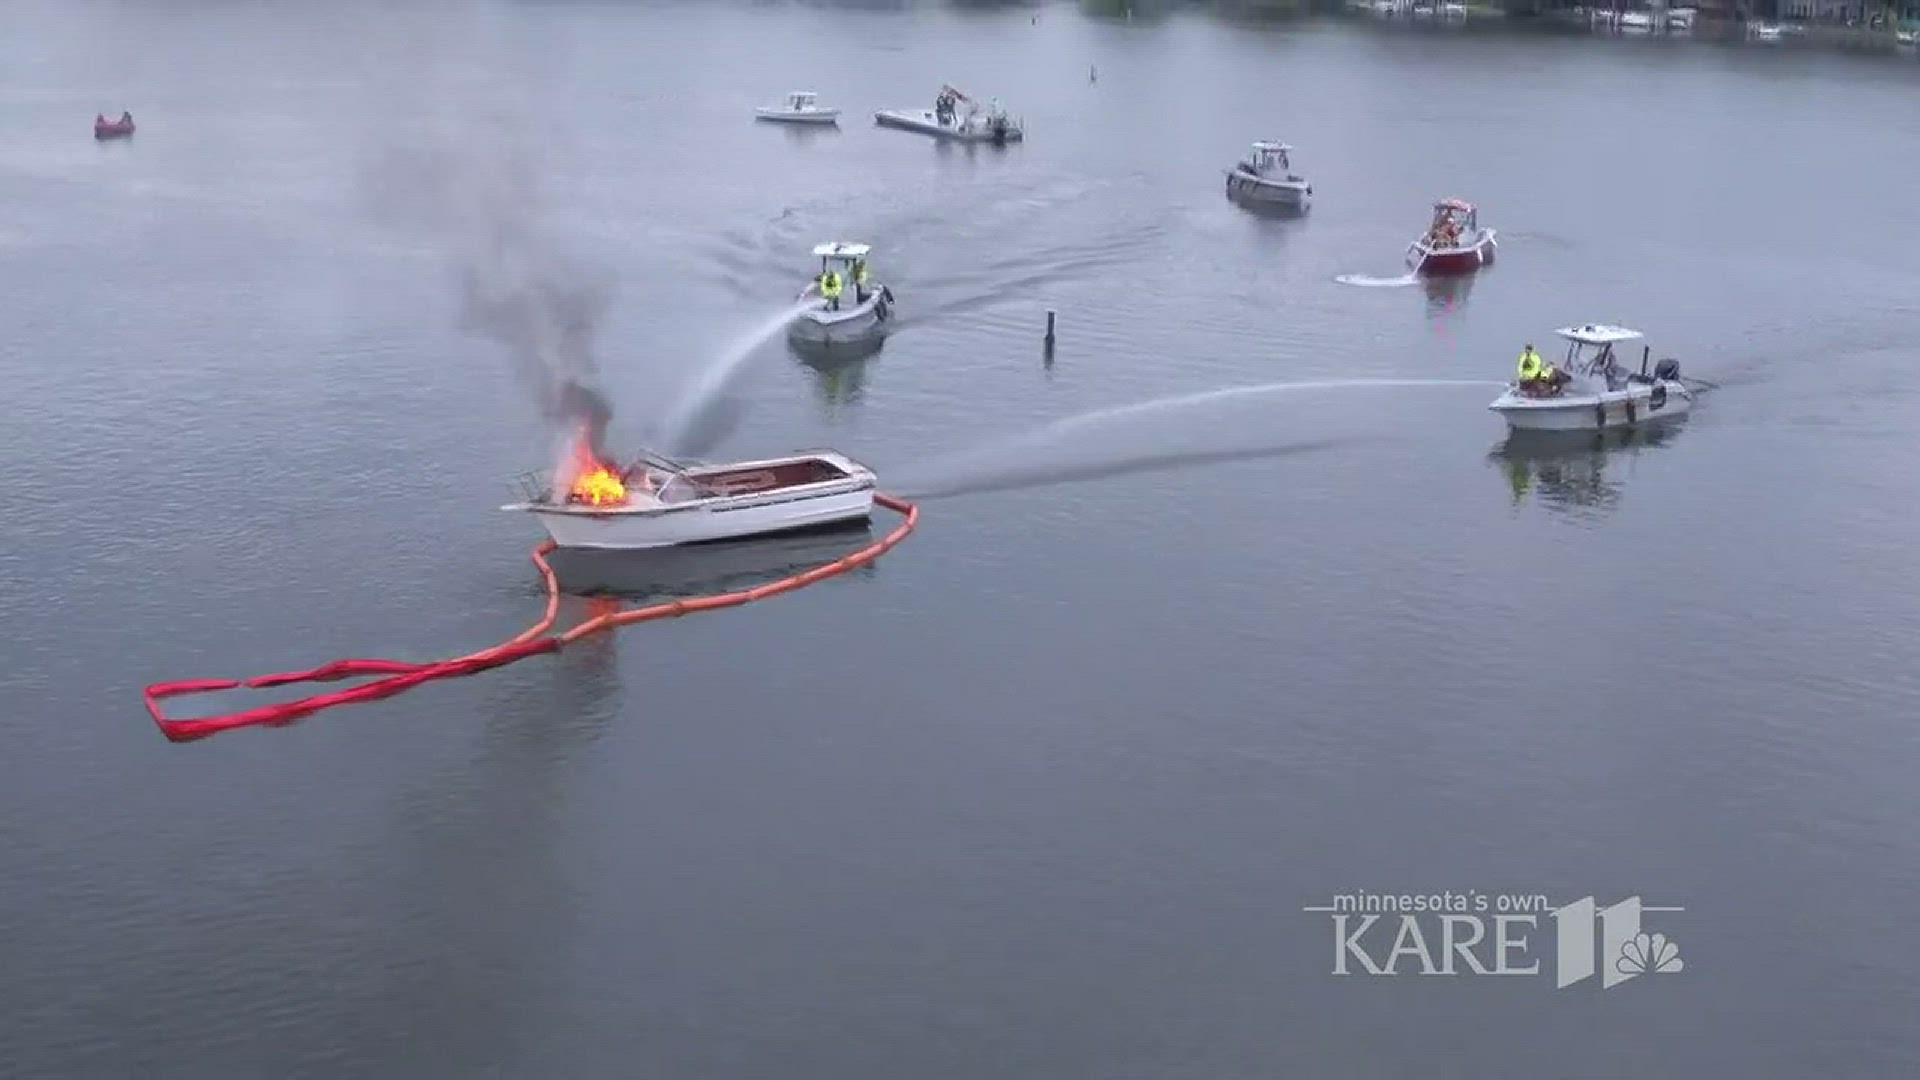 There are at least a dozen boat fires in Minnesota every year. So what causes a boat to ignite? What happens if you're on one that goes up in flames? What should boat owners do to prevent them?